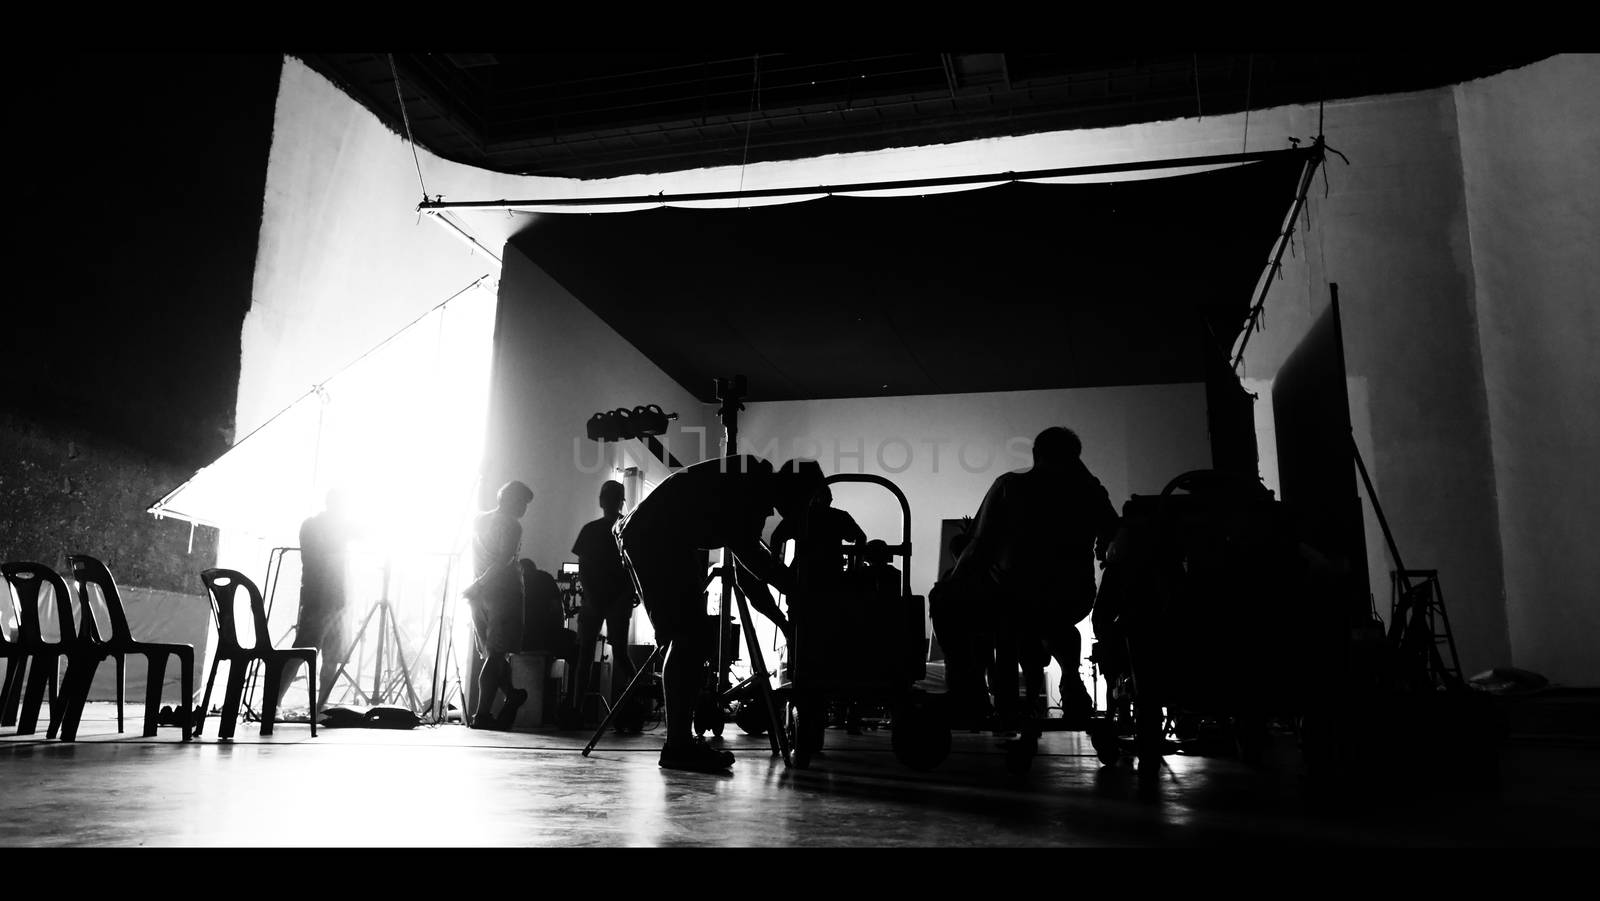 Behind the shooting of video online commercial production and film crew team working and setting light or camera or soft box and equipment set up in big studio in silhouette style